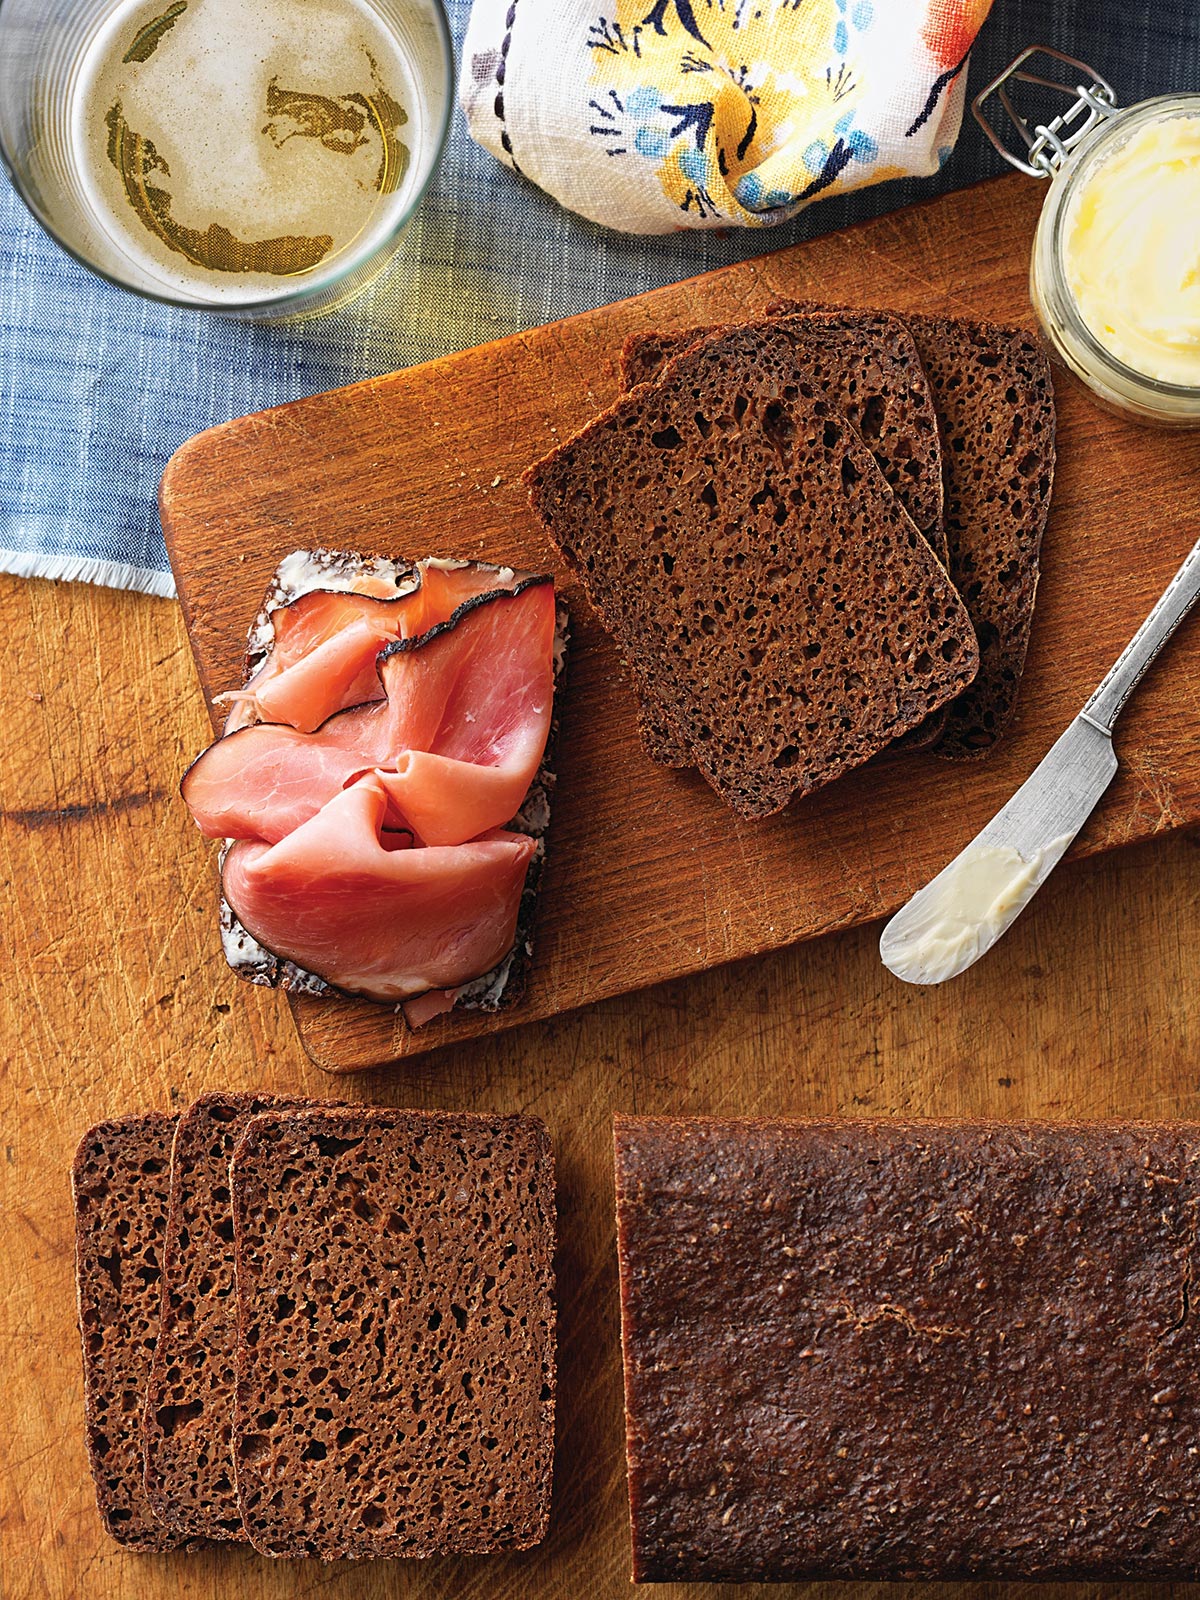 Westphalian Rye Bread cut into slices, topped with smoked ham